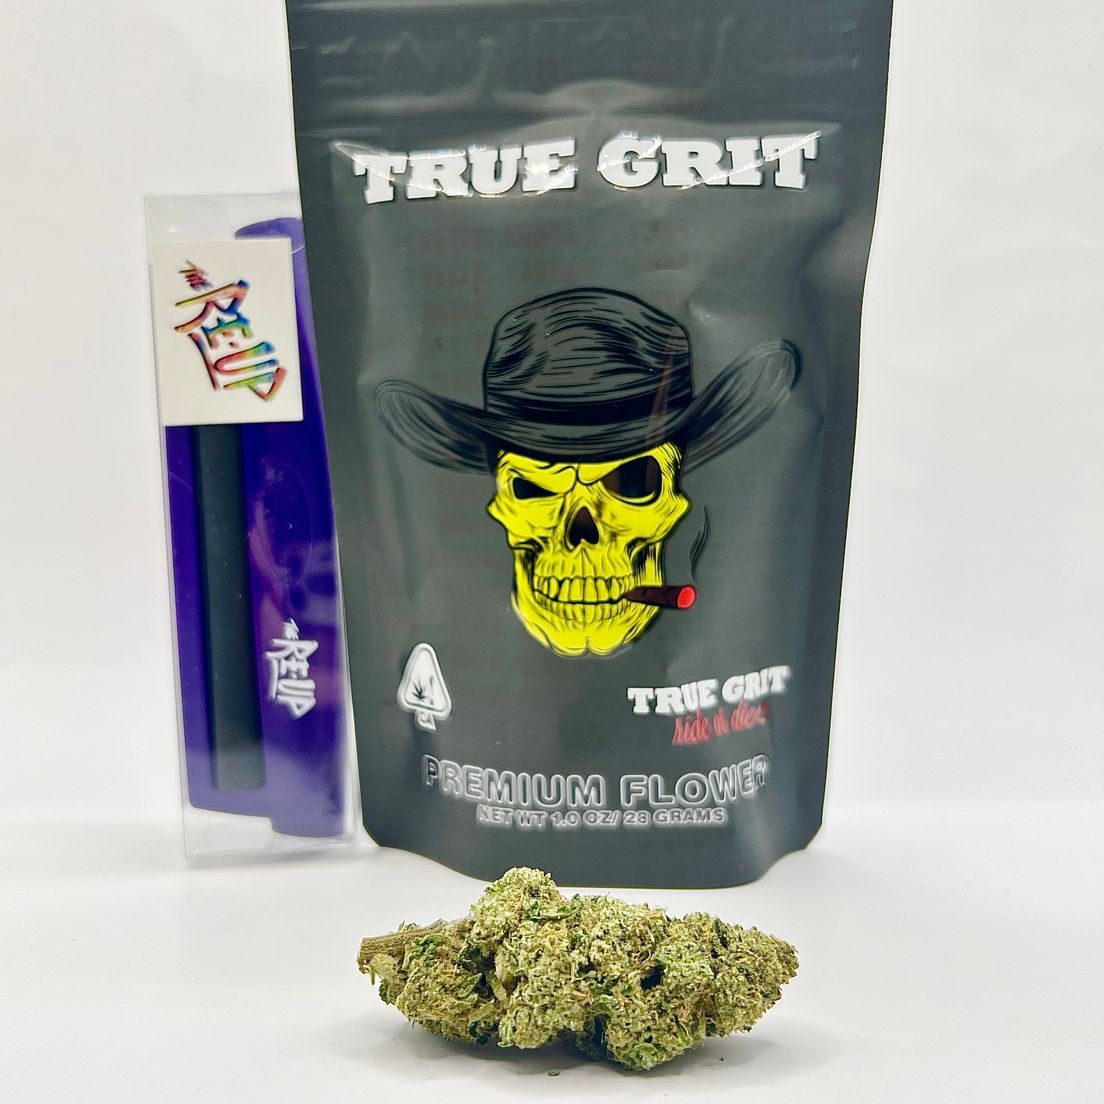 *Deal! $89 1 oz. Purple Punch (36.88%/Indica) - True Grit + Joint Roller